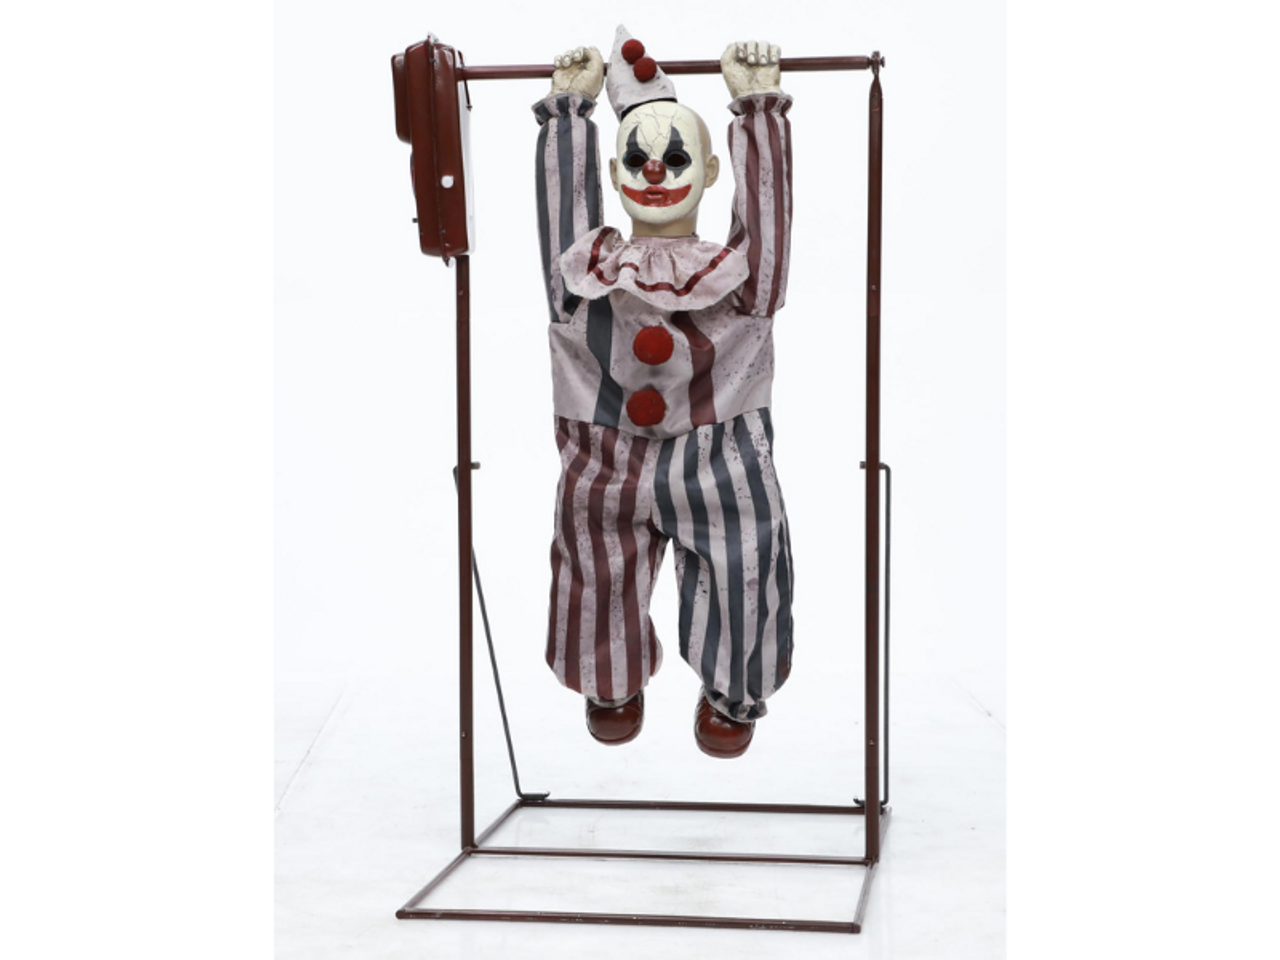 Animated Tumbling Clown Doll

Step right up and bring the circus to your home! Watch as this 3-foot Tumbling Clown Doll does a party trick for you and your guests. This Tumbling Clown Doll flips over the bar in circles to the creepy sounds of Circus Calliope Music. Motion Sensor activates teh Tumbling and the Music. Easy assembly with Quick Connect Metal Frame. Make the Tumbling Clown Doll a unique addition to your Halloween clown or haunted circus collection.

Packaging: Box with Color Label.

Features:

Animated Tumbling Movement
Circus Calliope Music Plays
Plug-In Adapter
Recommended Use: Indoor
Easy Assembly with Quick Connect Metal Frame